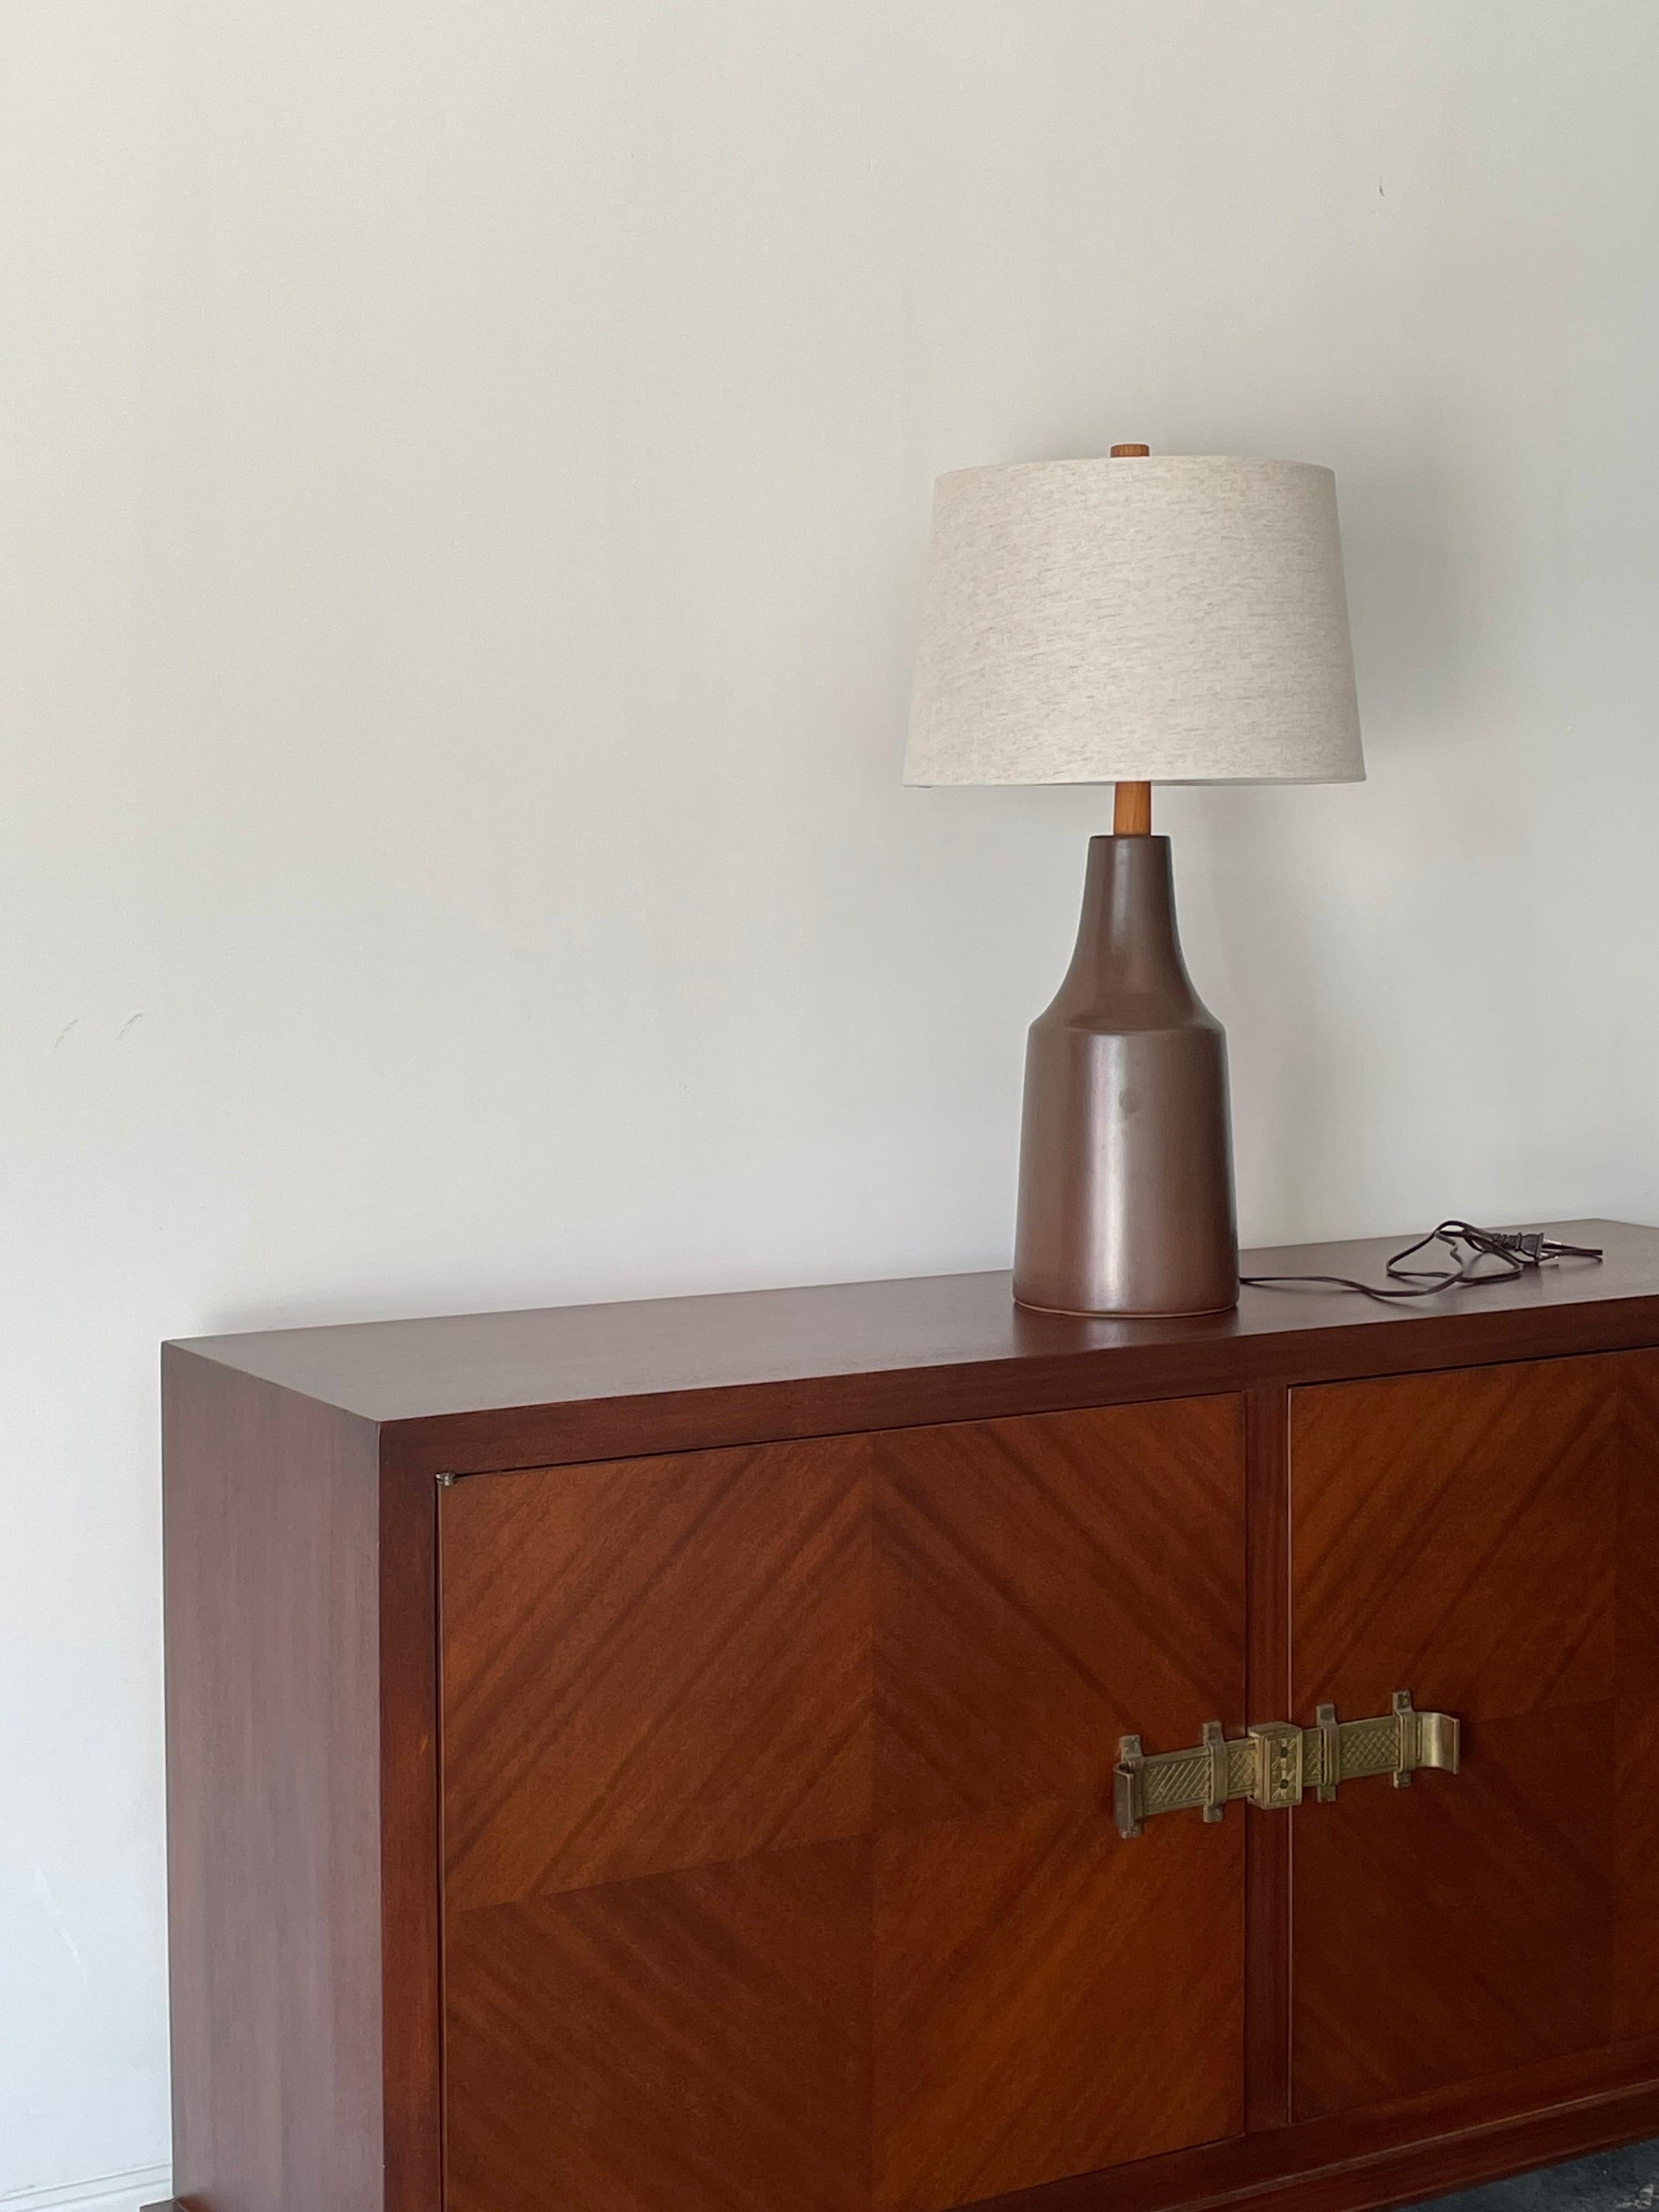 Large modernist ceramic table lamp designed by famed ceramicist duo Jane and Gordon Martz for Marshall Studios. Color is a dark brown with some amber tones present towards the bottom 

Measures: Overall
28” tall 
15” wide 

Ceramic 
15.5”